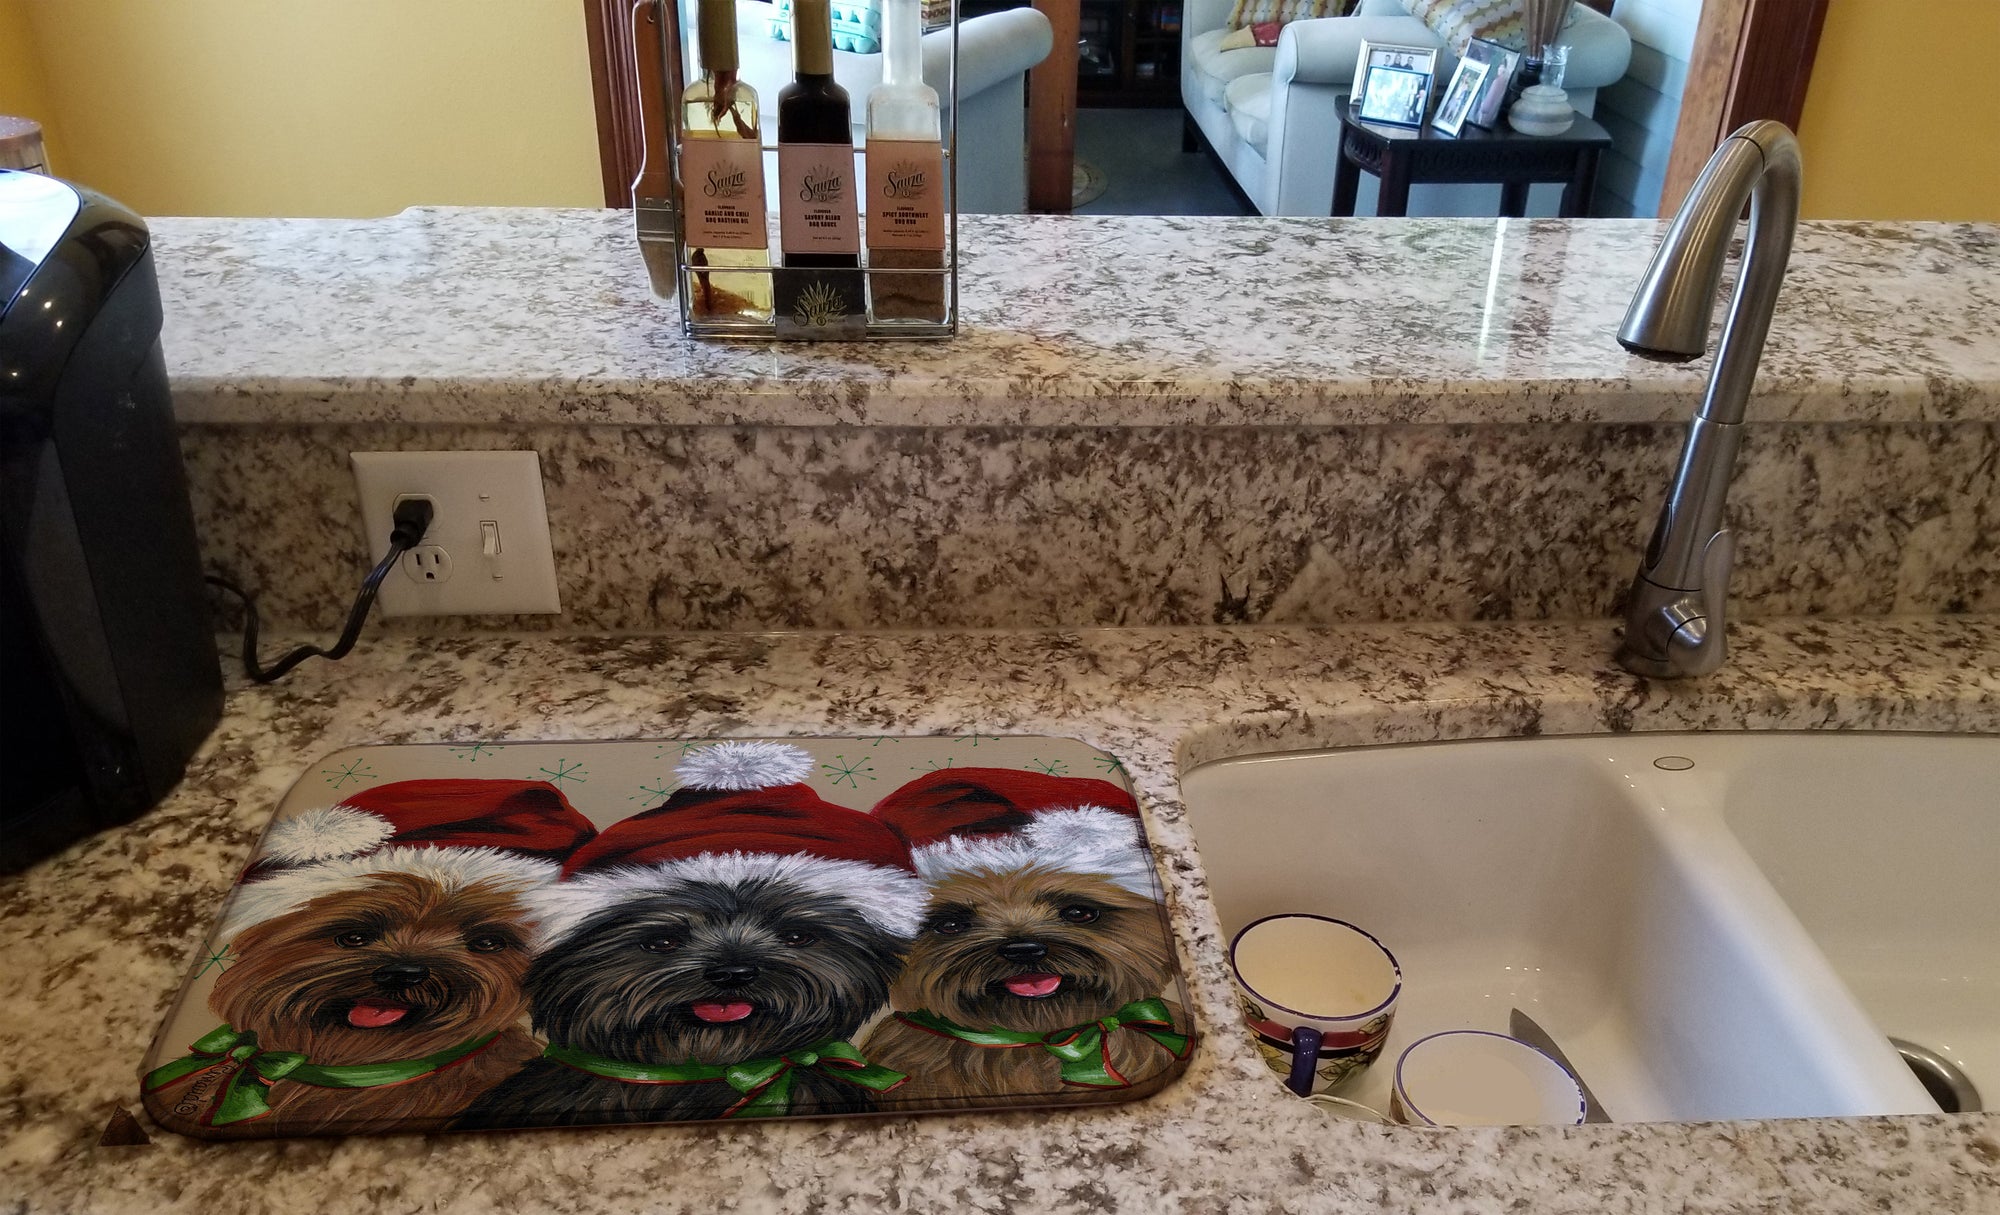 Cairn Terrier Christmas Ceaser and Co Dish Drying Mat PPP3251DDM  the-store.com.